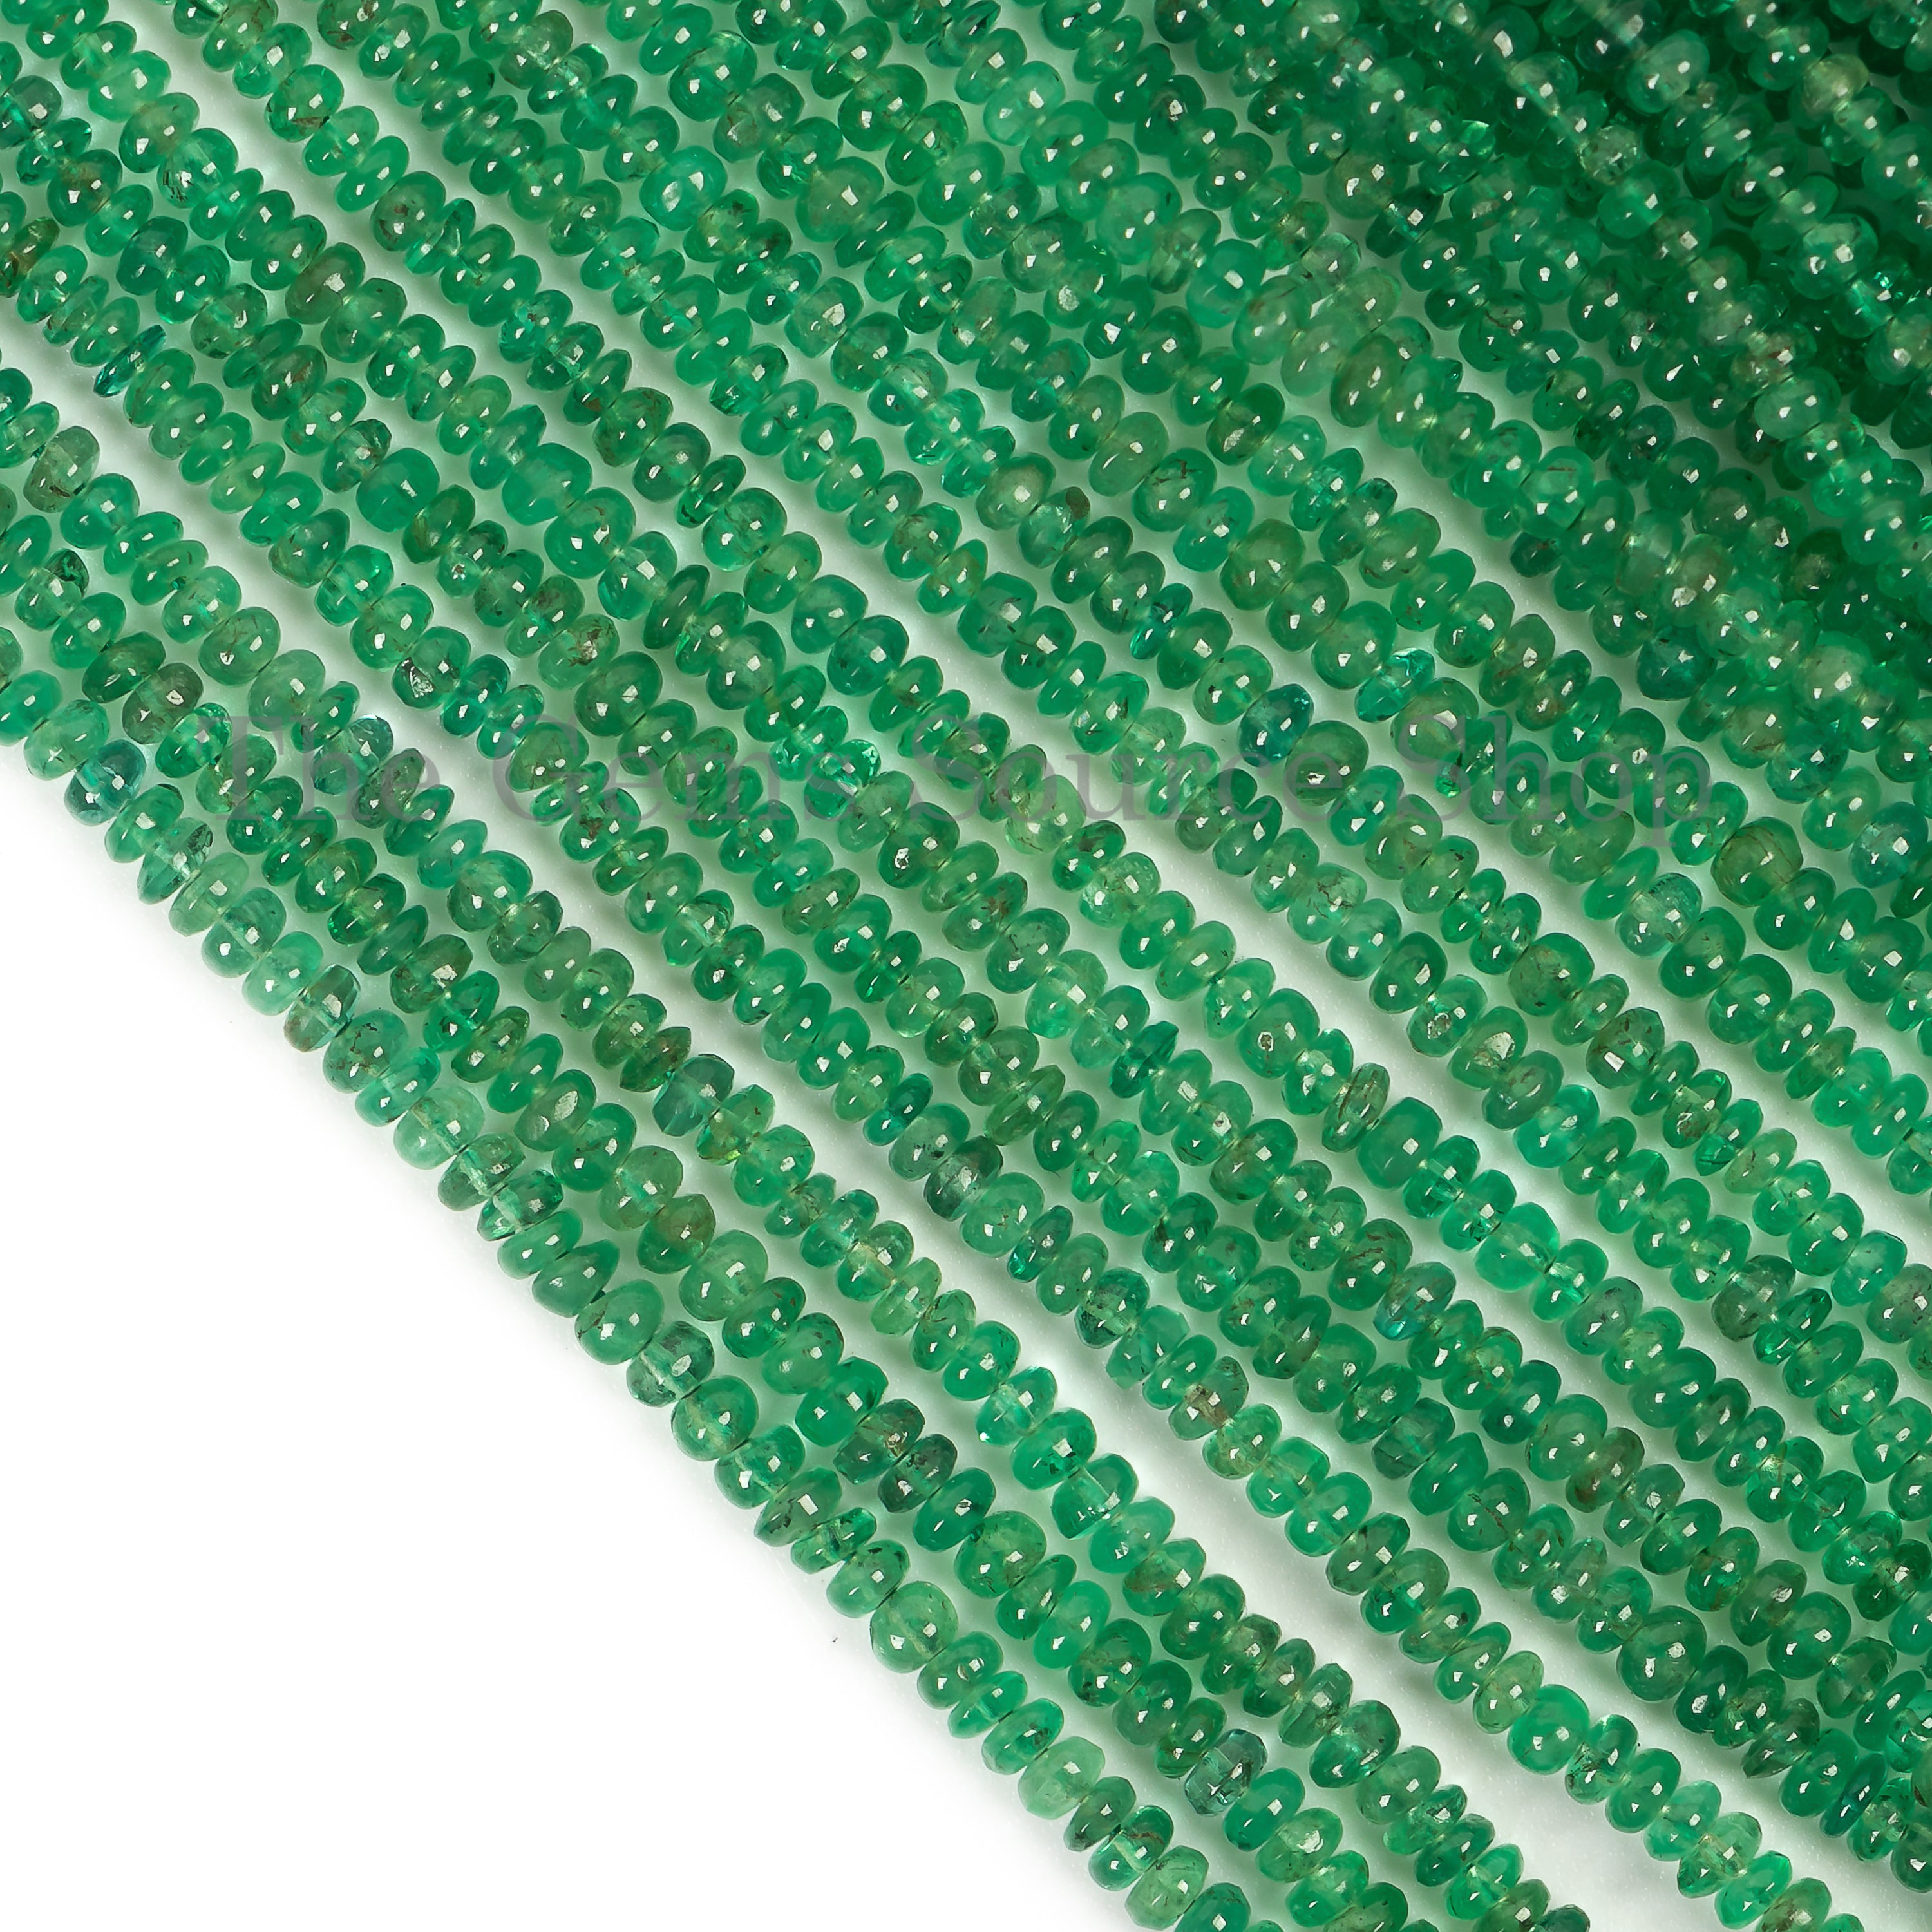 Natural Emerald Beads, 2.5-3 mm Emerald Rondelle Shape, Emerald Smooth Beads, Emerald Gemstone Beads, Emerald Plain Jewelry Making Beads